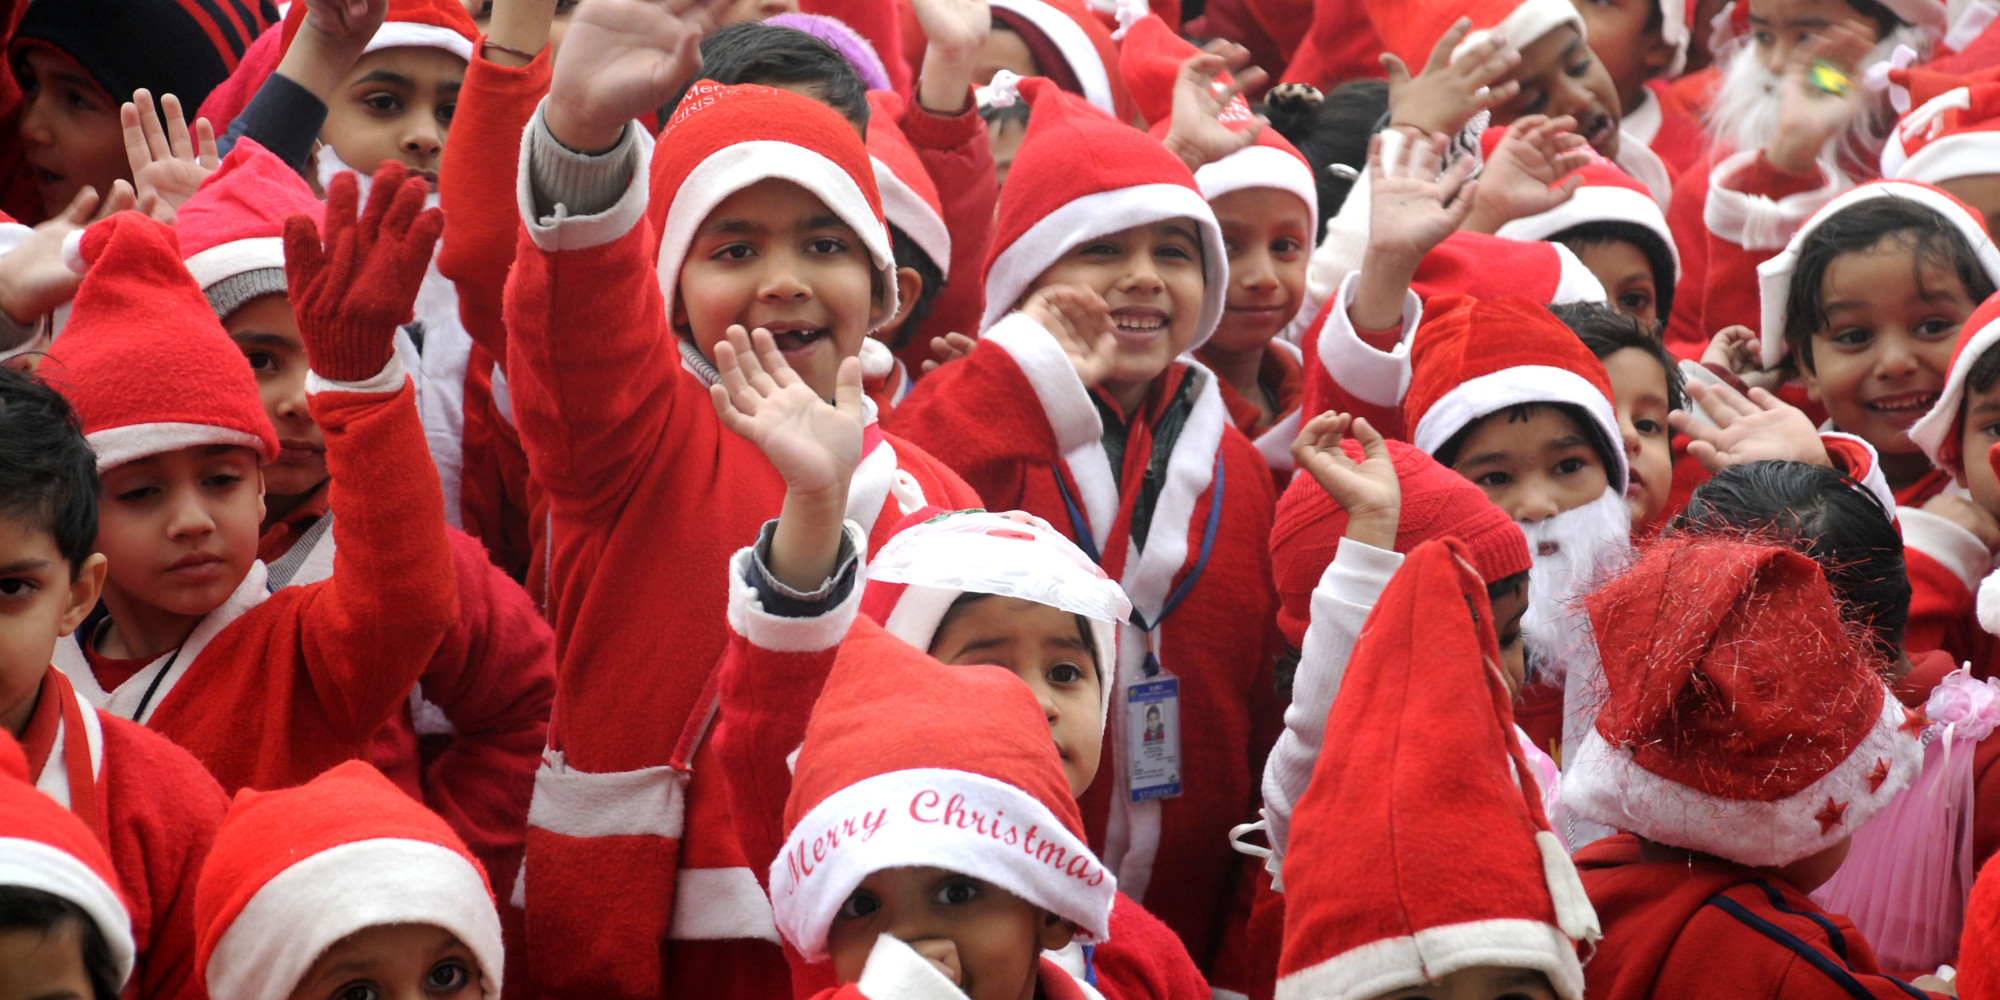 Christmas Celebrations In India Take Place Across Religions  HuffPost